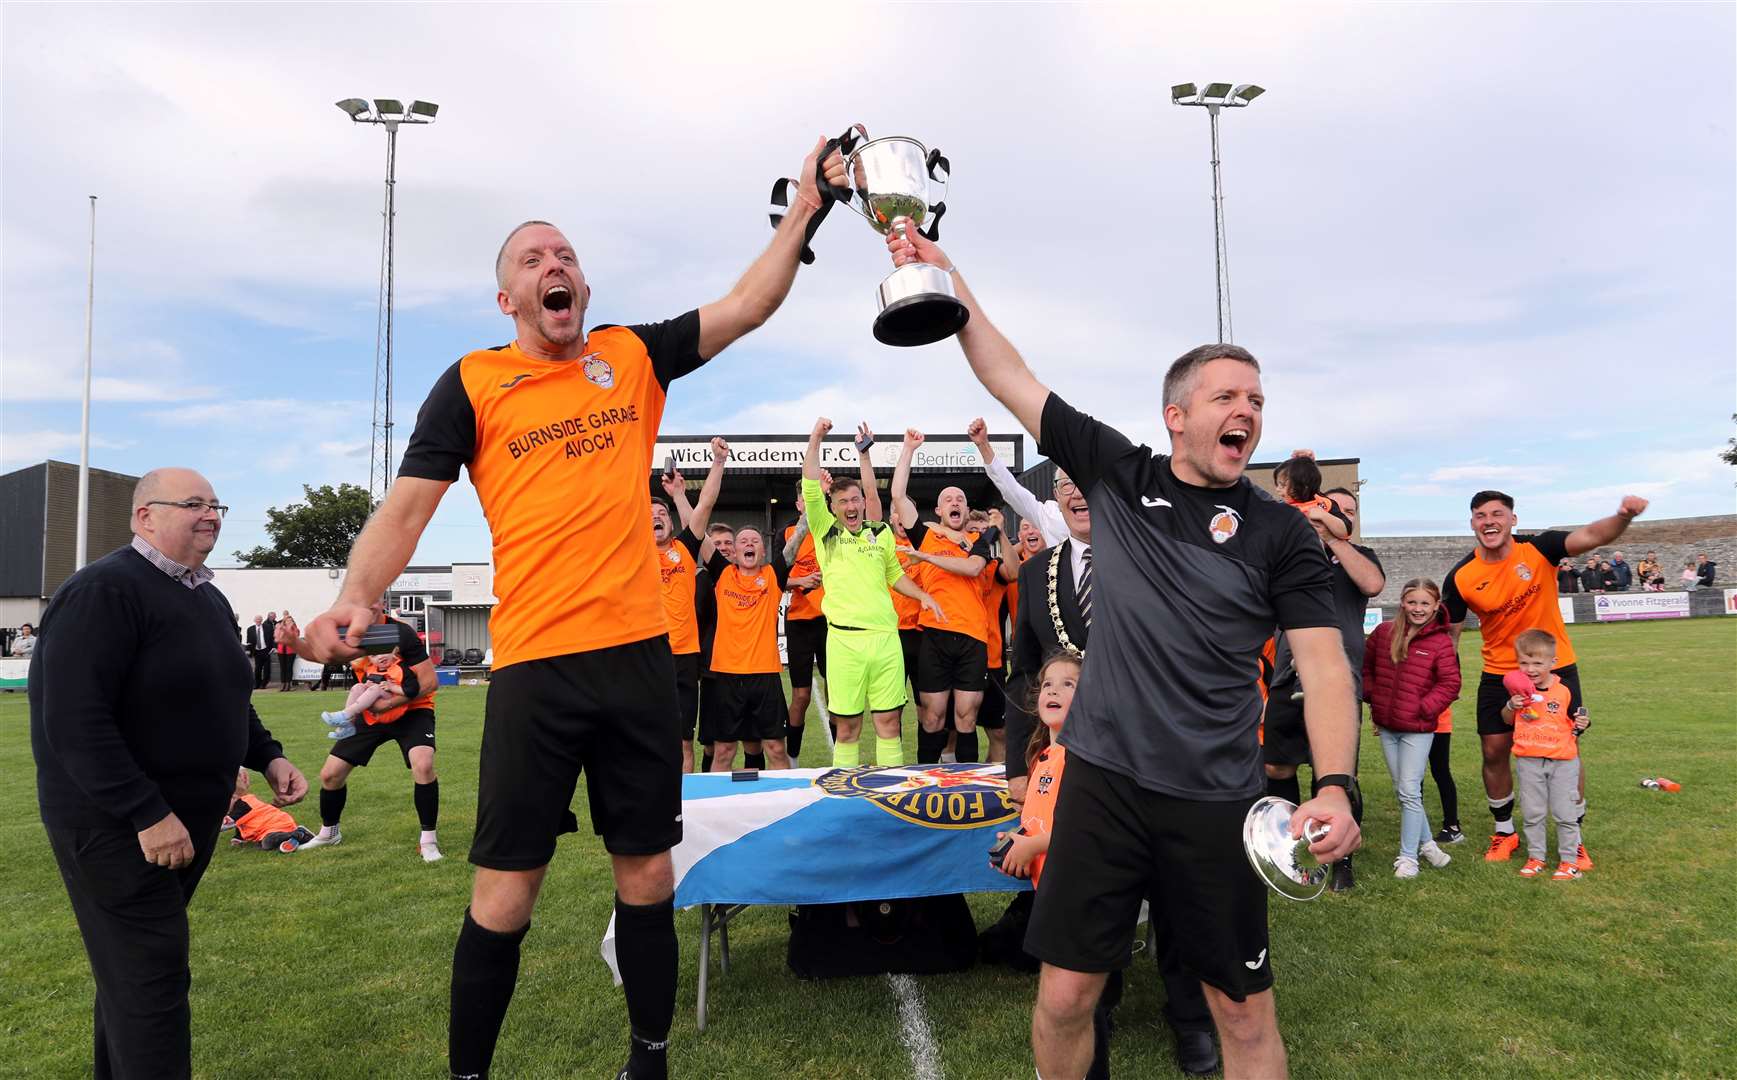 Twin brothers Keith (left) and Colin Mason lift the Highland Amateur Cup after Avoch's 1-0 victory over Wick Groats. Club captain Colin was injured and couldn't play in the final. Keith was captain on the day. The trophy was presented by Hugh Morrison, chairman of the Scottish AFA Highland Executive (left), and Iain Cowden, president of the Scottish AFA. Picture: James Gunn